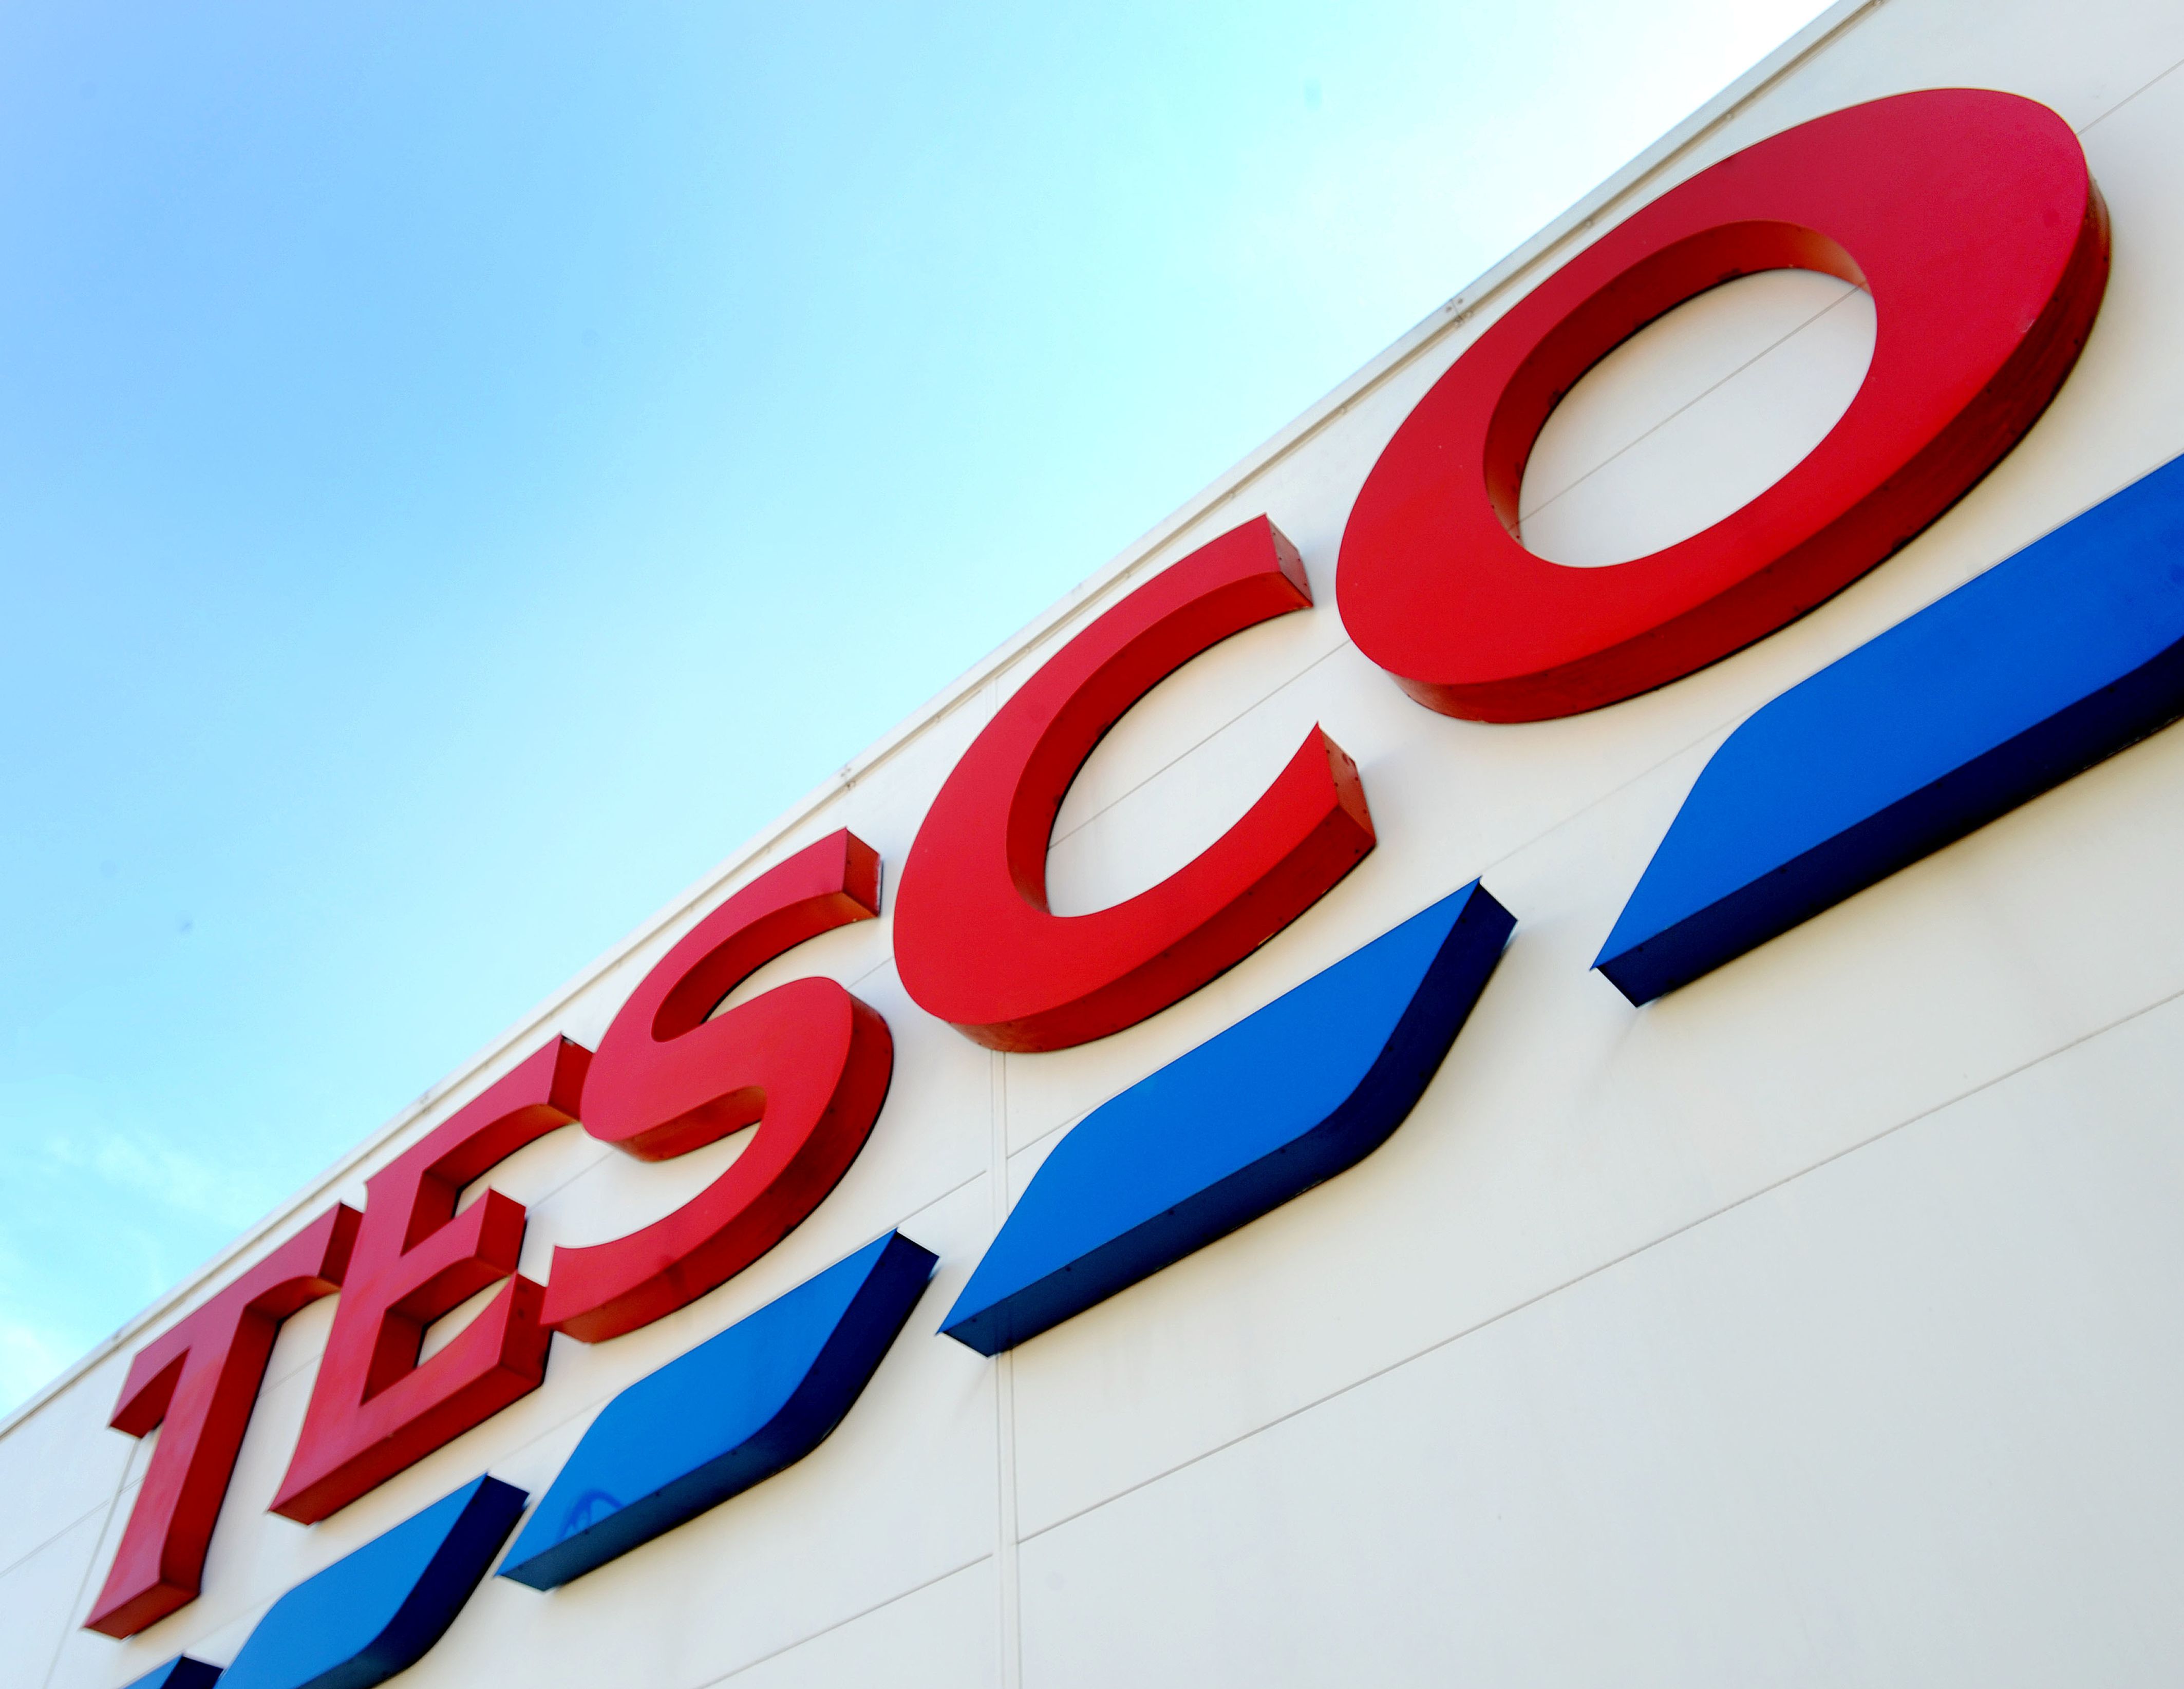 File photo dated 26/08/16 of a general view of a Tesco shop sign, as the supermarket giant said it will shake-up its shop management roles and shut remaining counters and hot delis in an overhaul which will impact around 2,100 jobs.